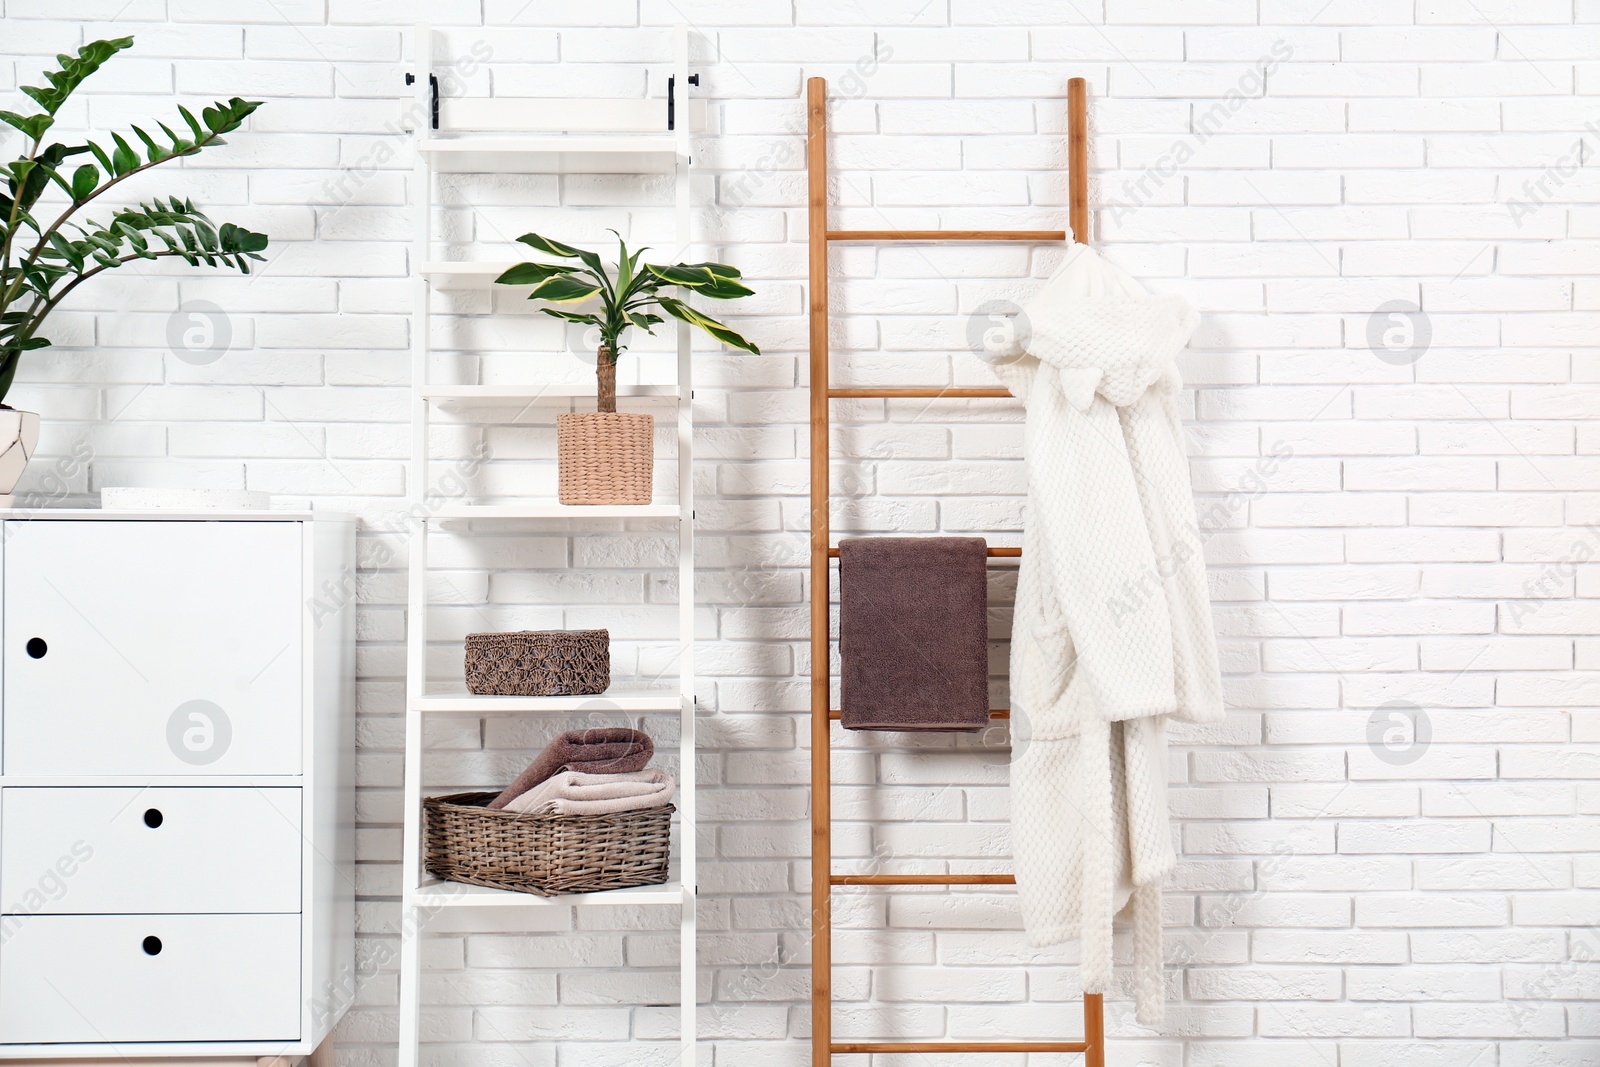 Photo of Furniture with clean towels and robe near brick wall in bathroom